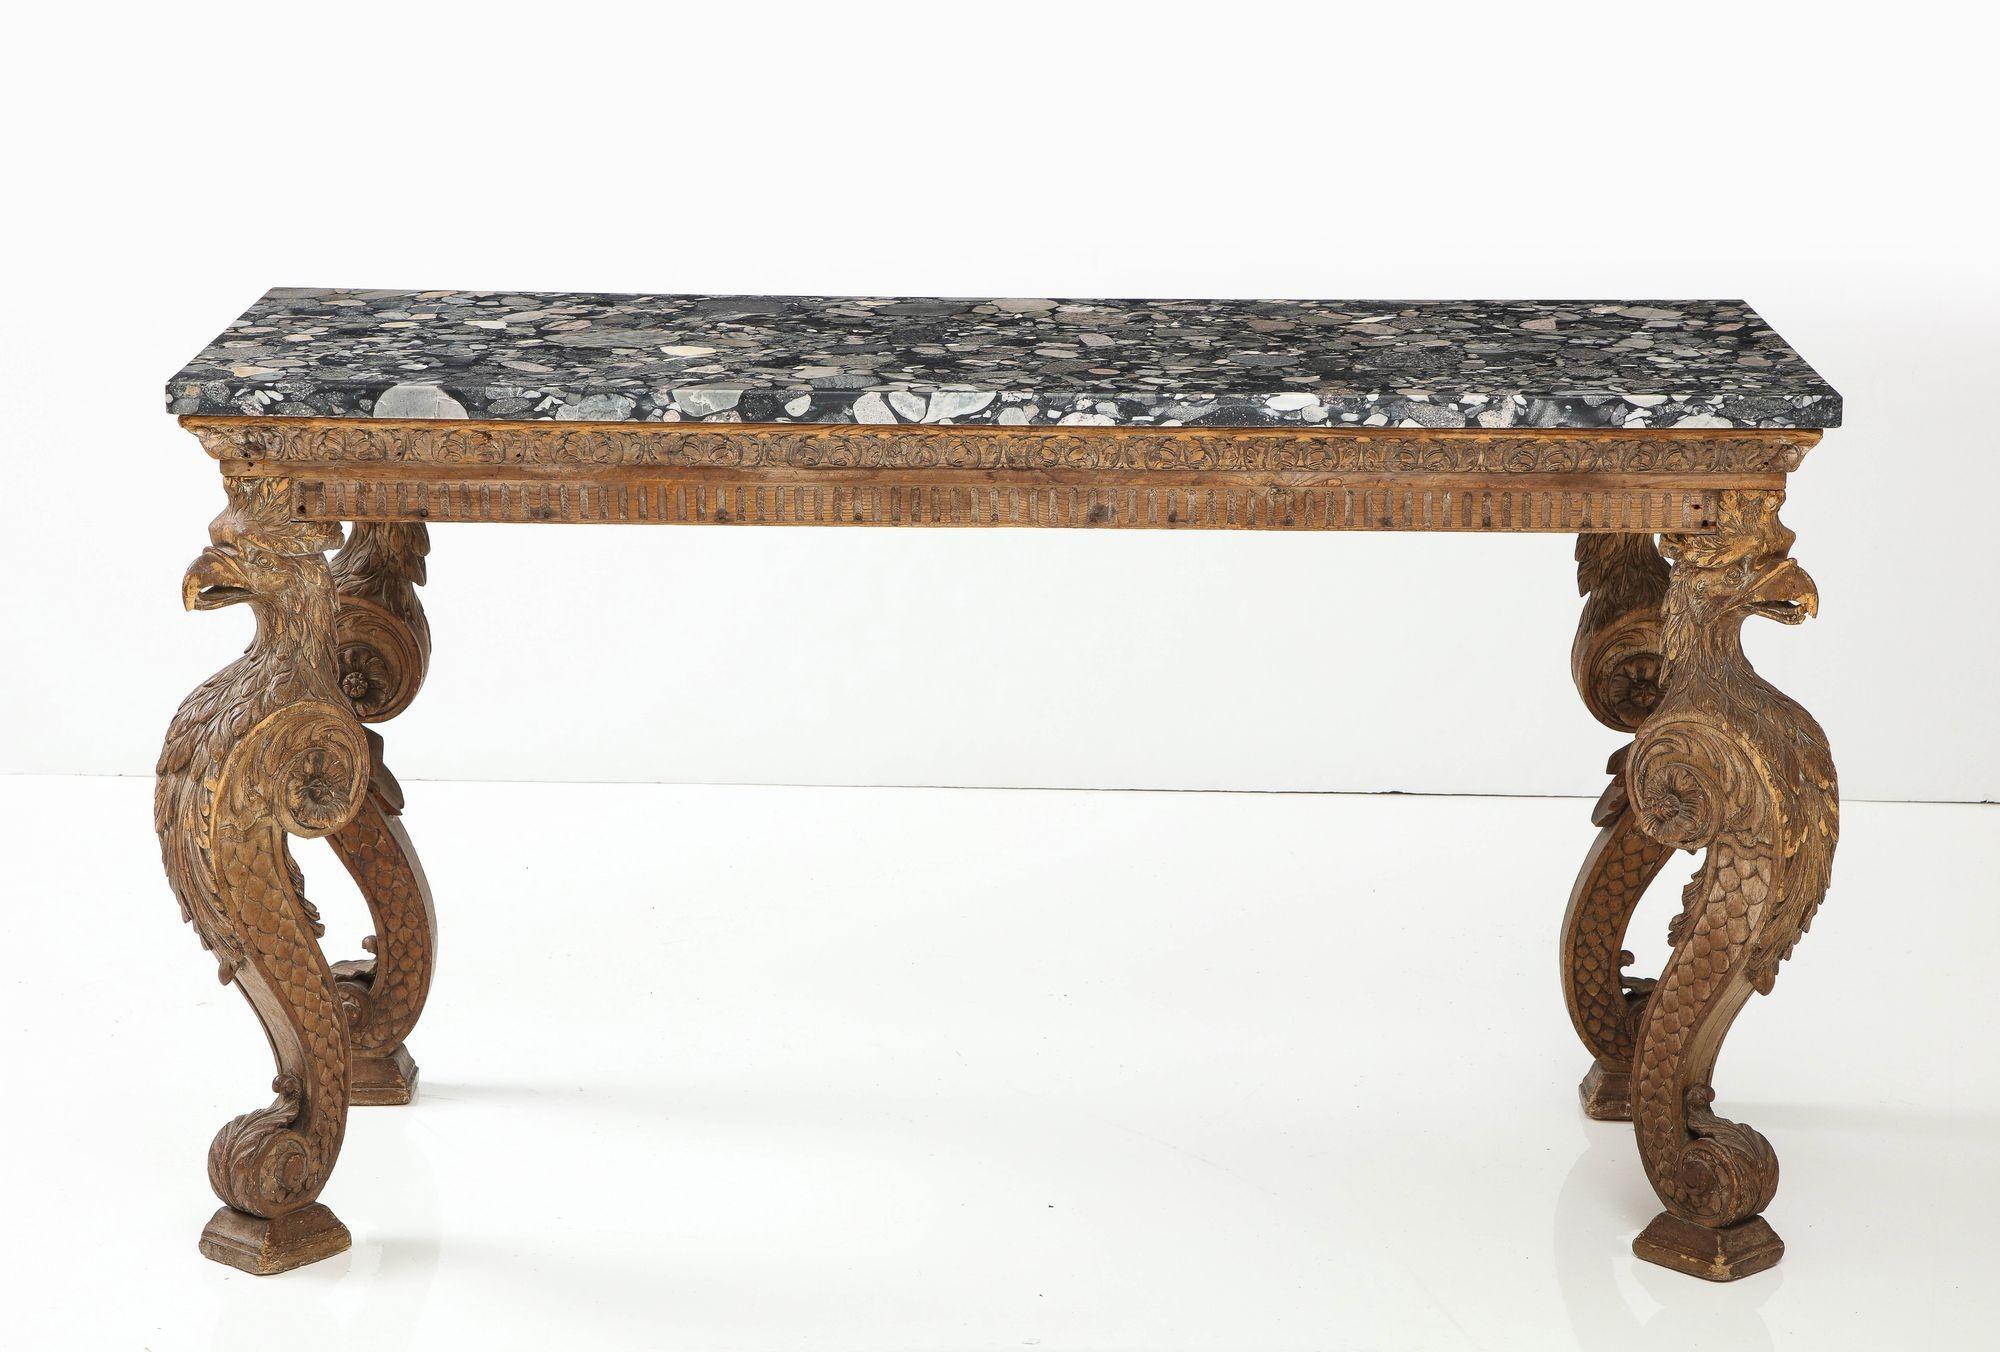 A very fine English marble top console table in the manner of William Kent, having features found in documented examples of Kent's work at Chiswick House and Holkham Hall. Reeded and acanthus carved apron over bold carved eagle head scrolled legs